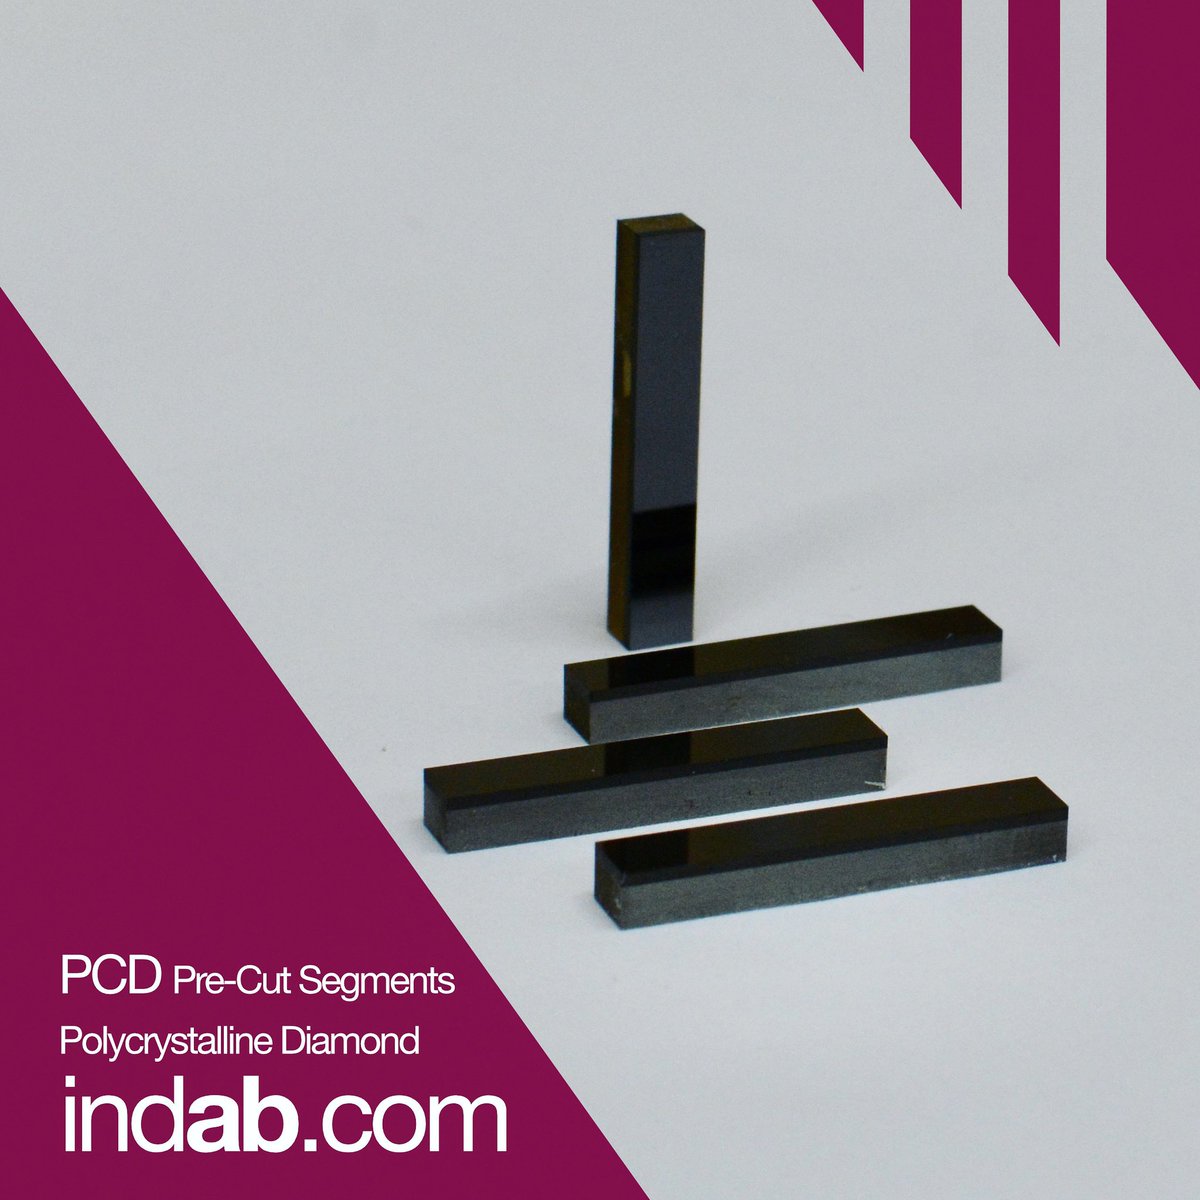 Pre-cut PCD to our customer’s specification. These parts will be used to produce some high quality PCD wearparts making sure that application tolerances are maintained for as long as possible without interruption. #pcdtools #diamondtools #ukmfg #indabuk